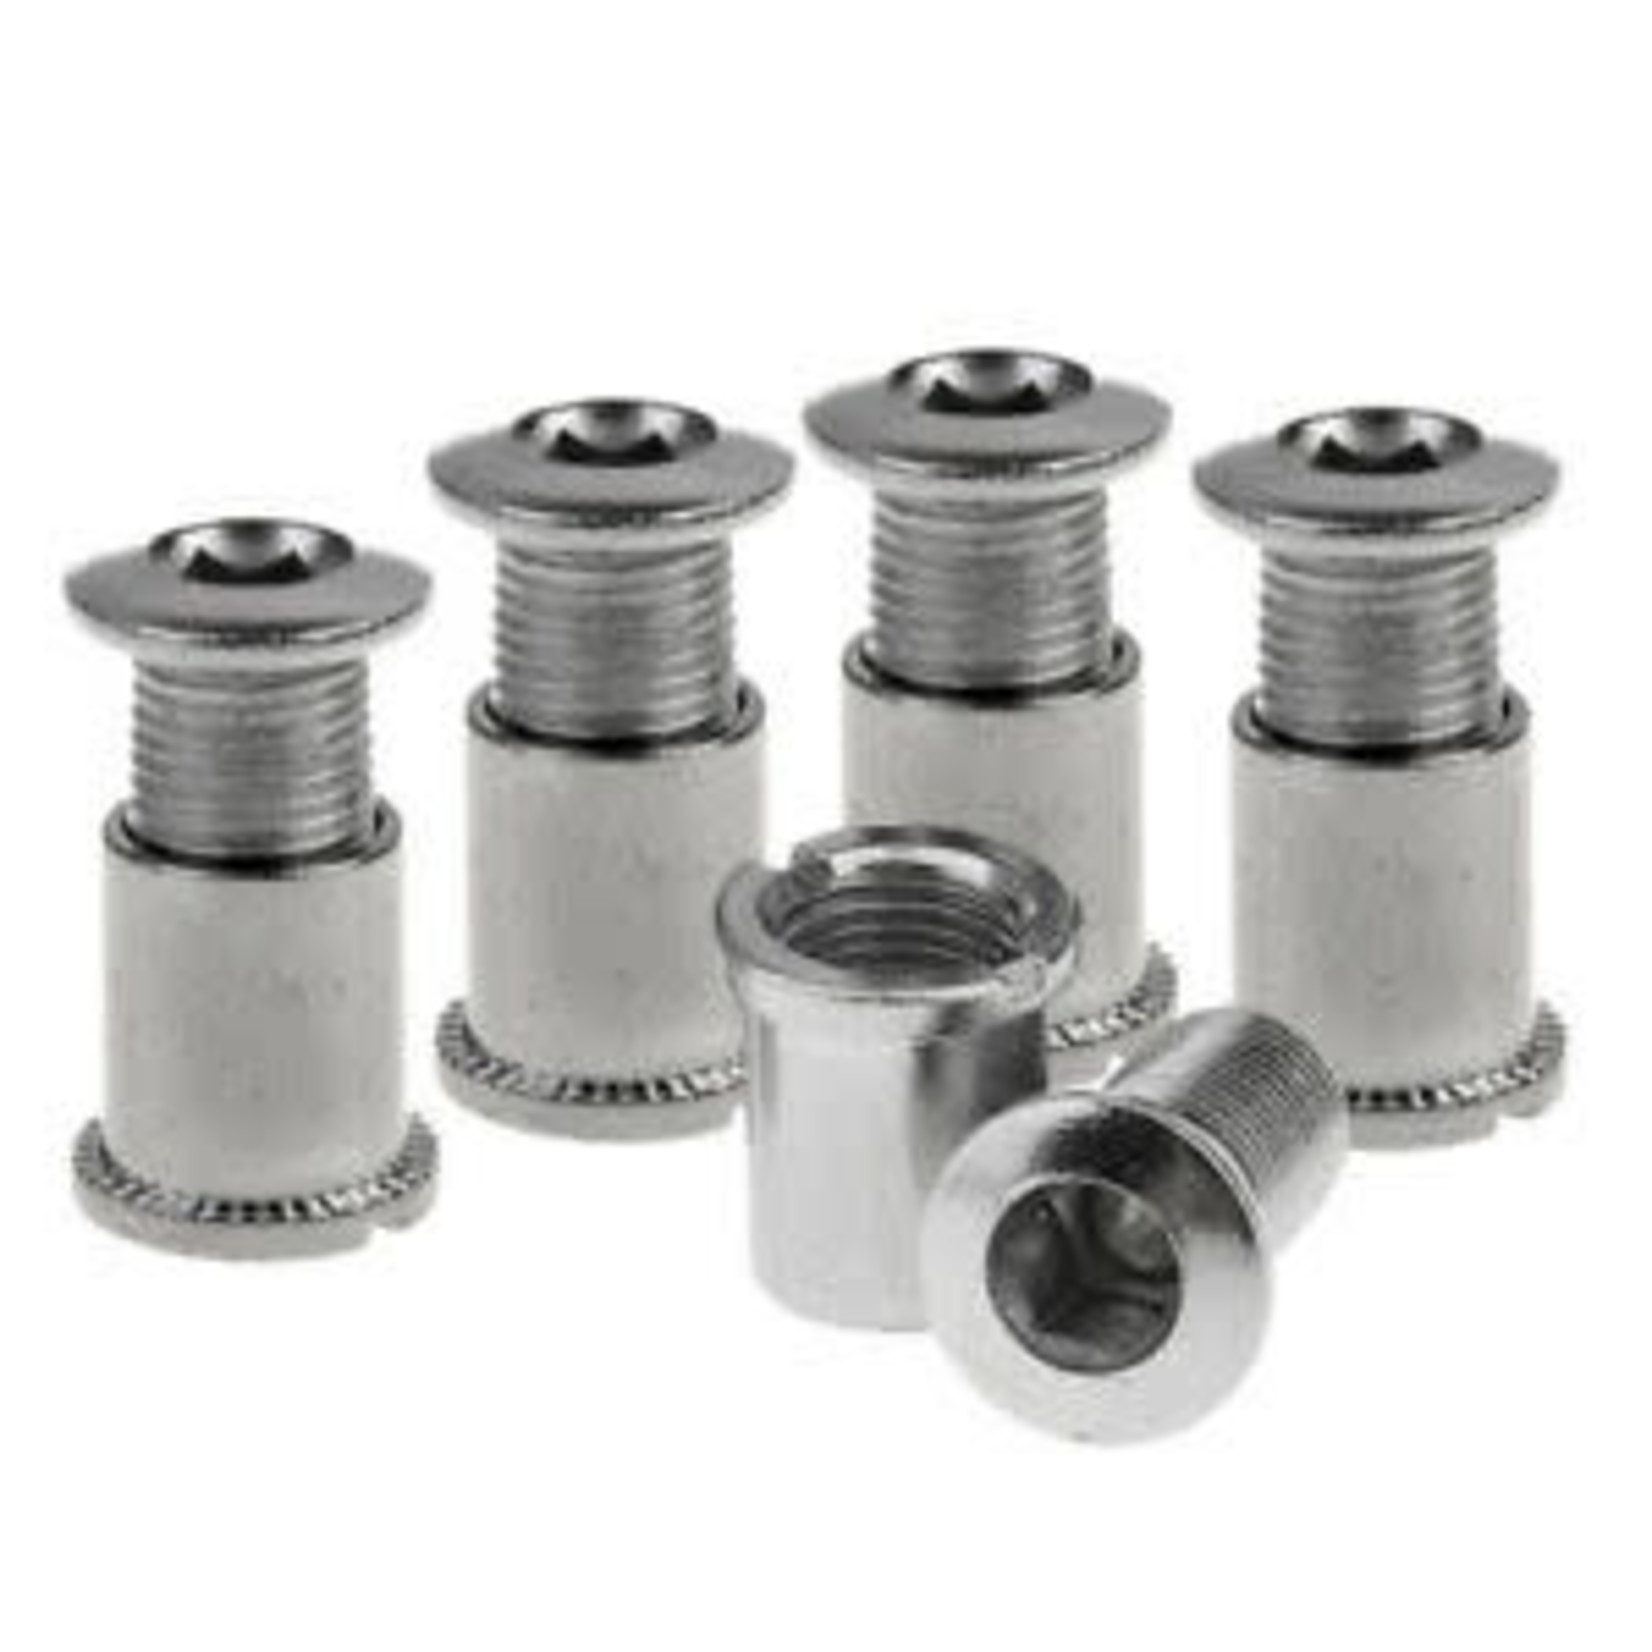 Varia, Bolts & nuts for singlespeed chainrings, Chrome-plated steel, 6.5mm, 5 units per bag